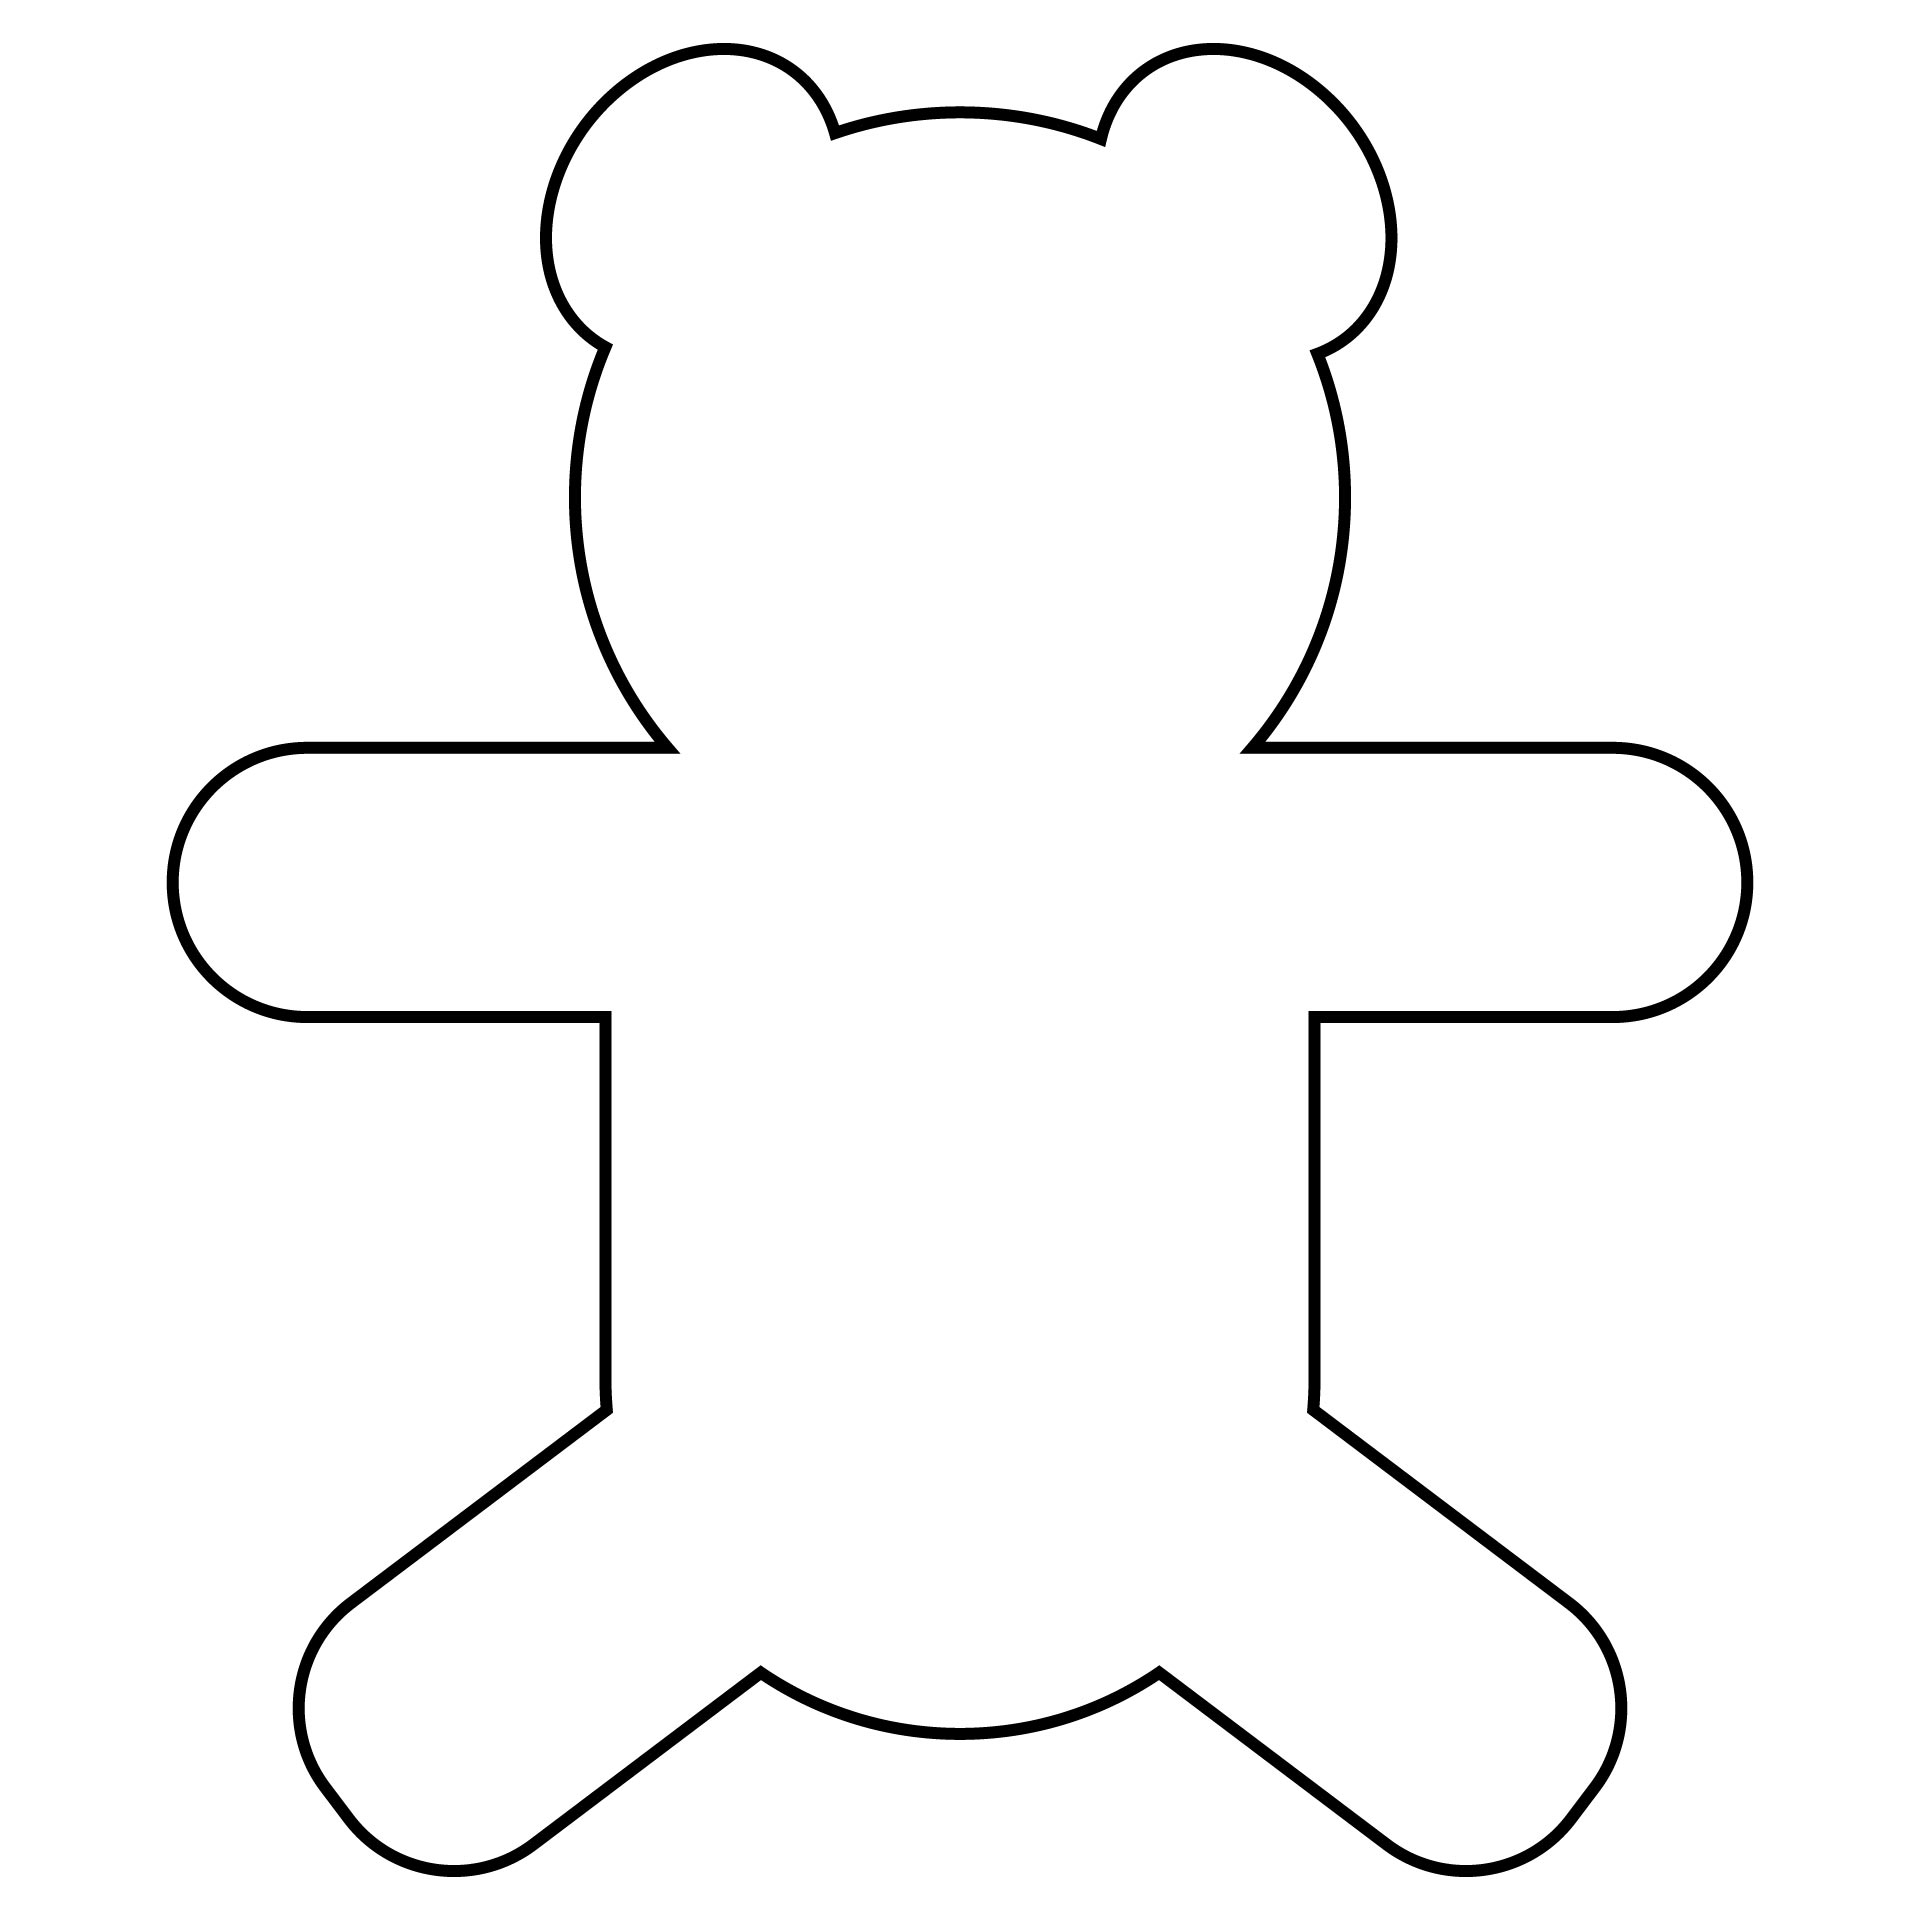 teddy-bear-outline-free-printable-printable-form-templates-and-letter